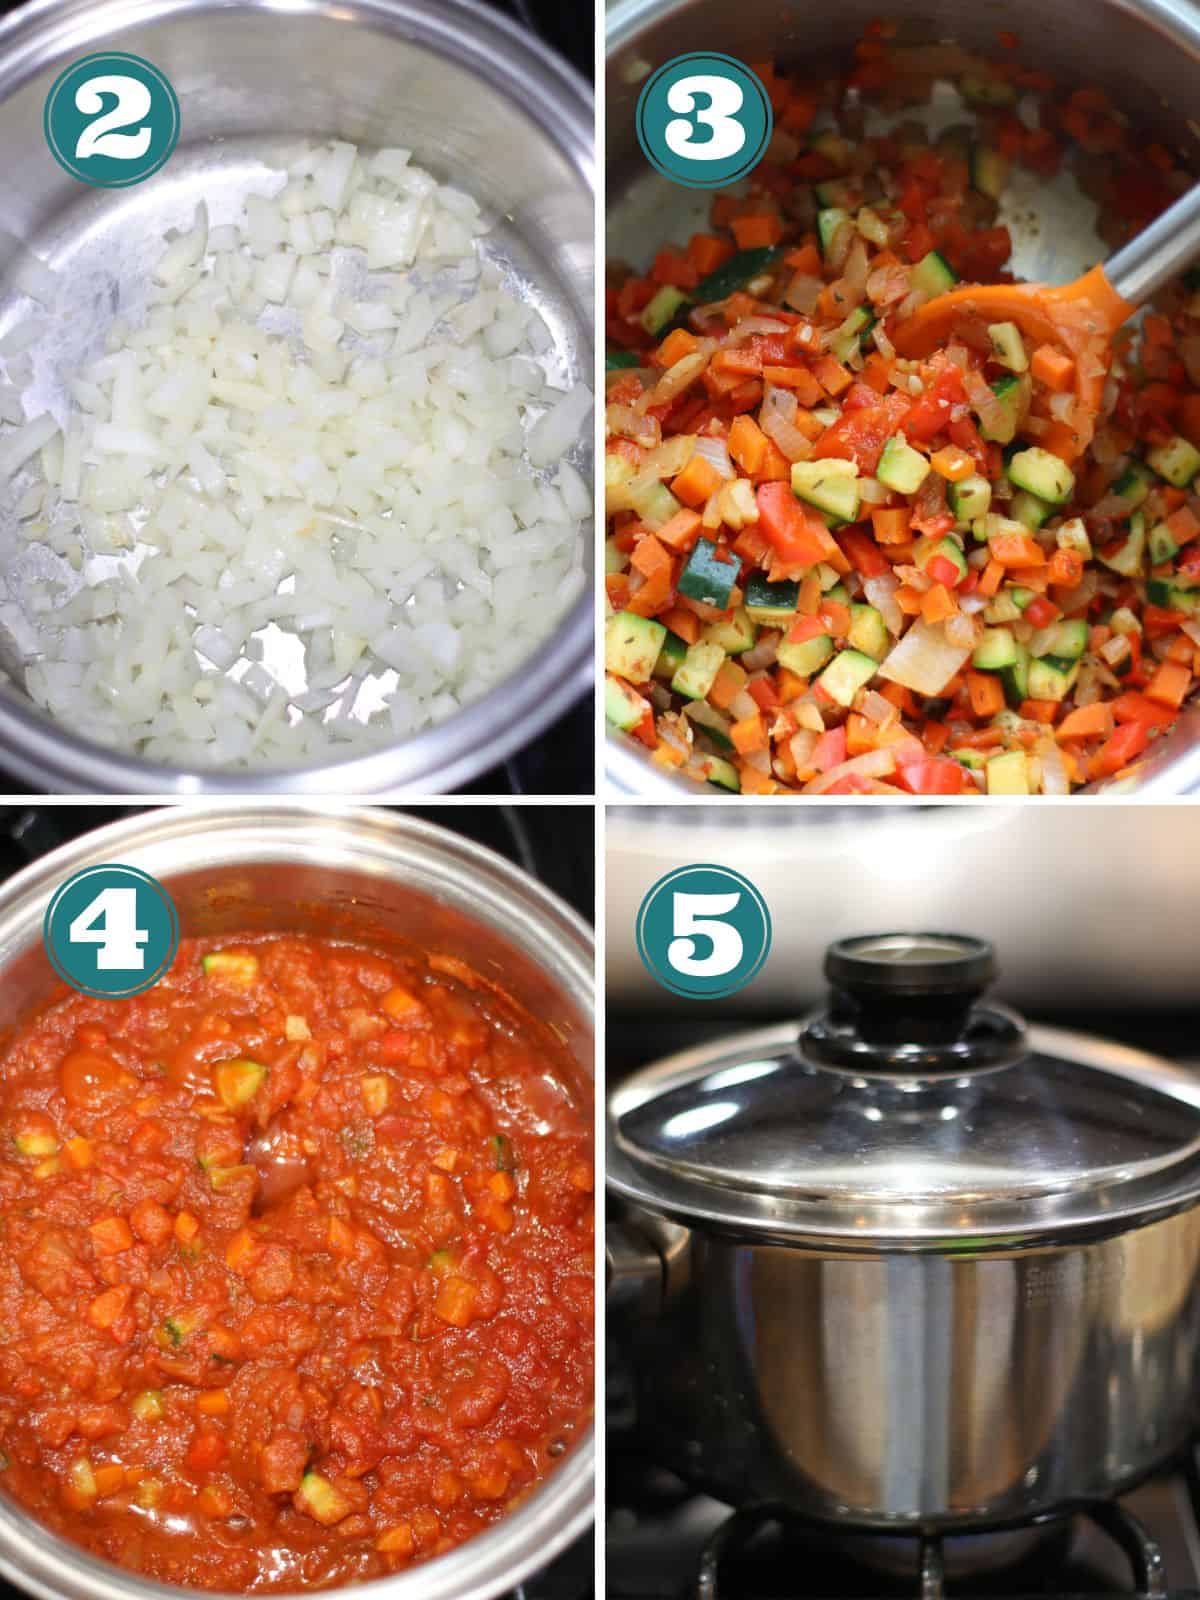 A four image collage showing cooking process step by step.